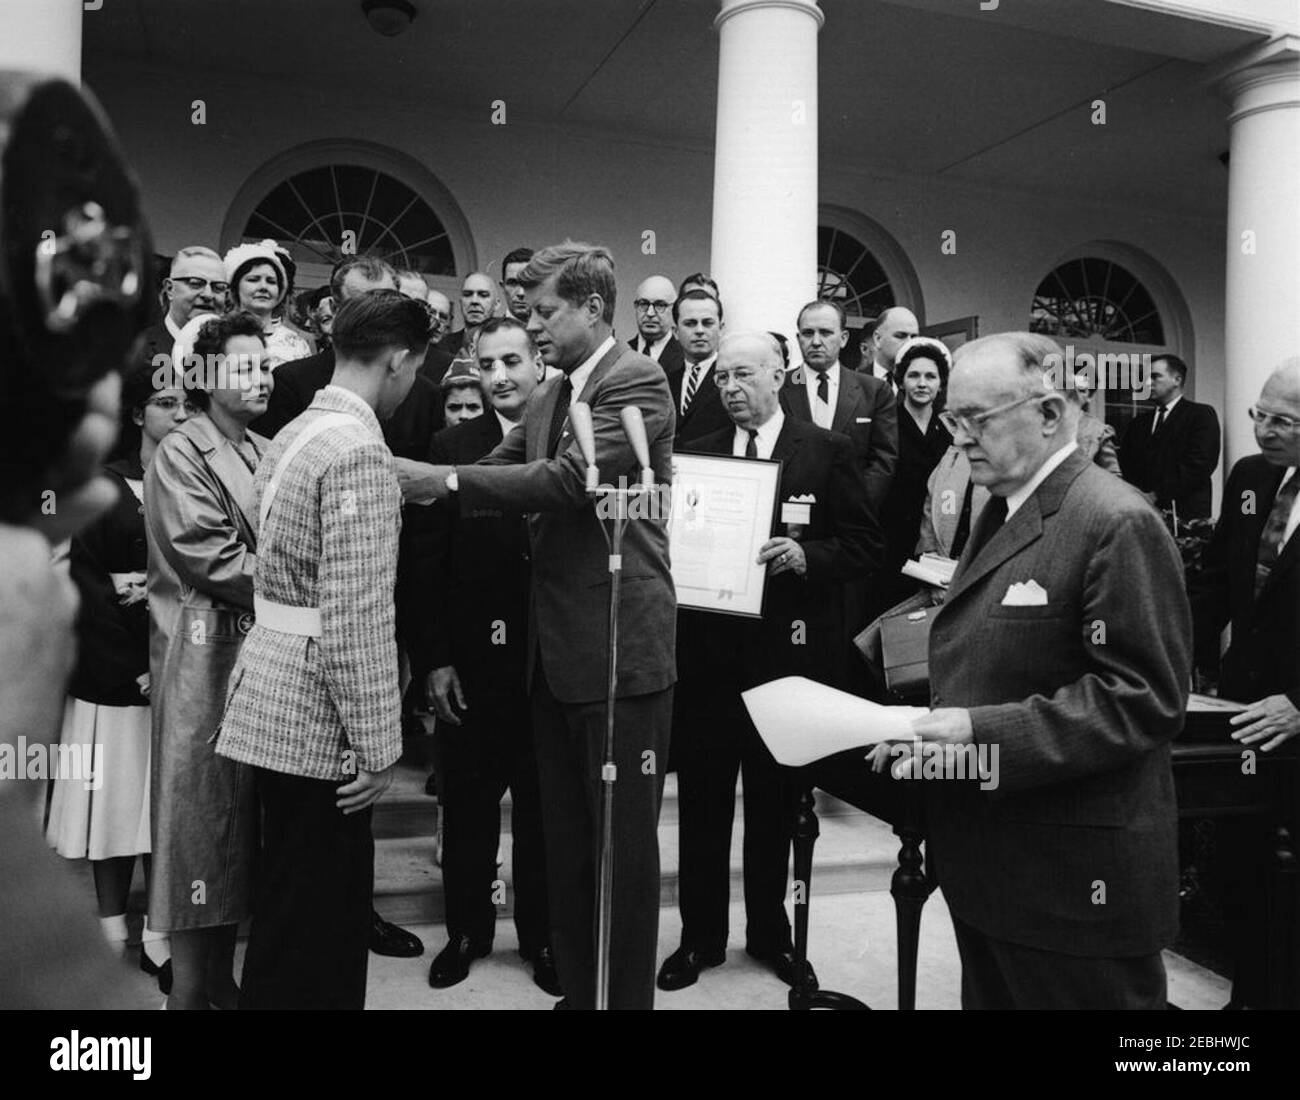 Presentation of the American Automobile Association (AAA) Lifesaving Awards in the Rose Garden, 9:50AM. President John F. Kennedy presents the American Automobile Association (AAA) Lifesaving Award to Ralph S. u201cSteveu201d Brannin (of North Pinellas Park, Florida); four other members of the organizationu2019s School Safety Patrol also received the award. Those pictured include: award recipient Patricia Miller (of Hereford, Pennsylvania); Representative Paul F. Schenck (Ohio); AAA School Traffic Safety Poster contest winner, Carol Mieczynski (of Manville, Rhode Island); Senator Claiborne Stock Photo